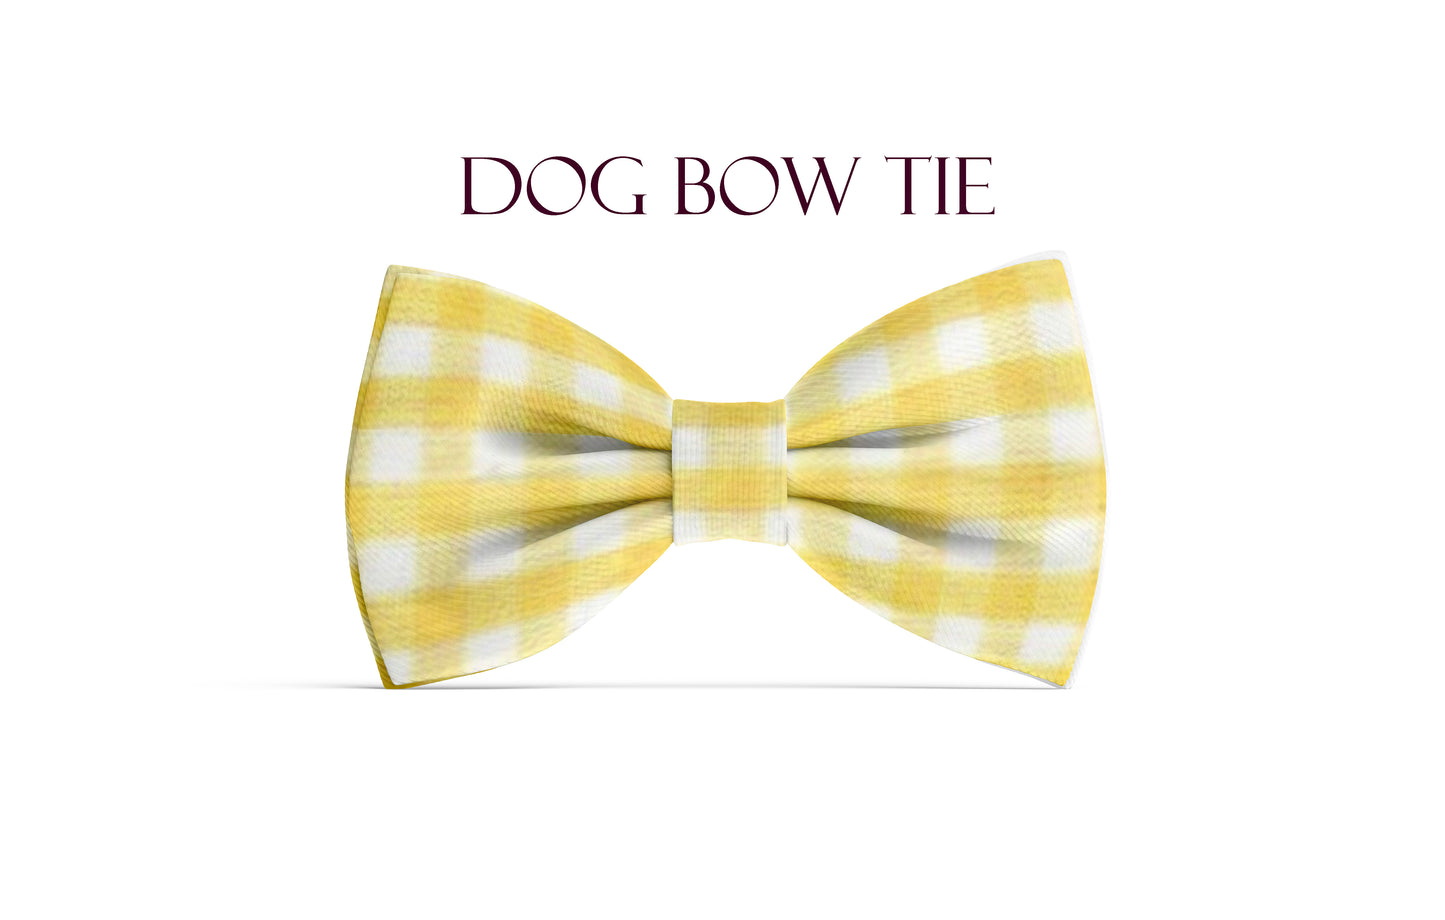 Dog Bow Tie - Yellow Gingham